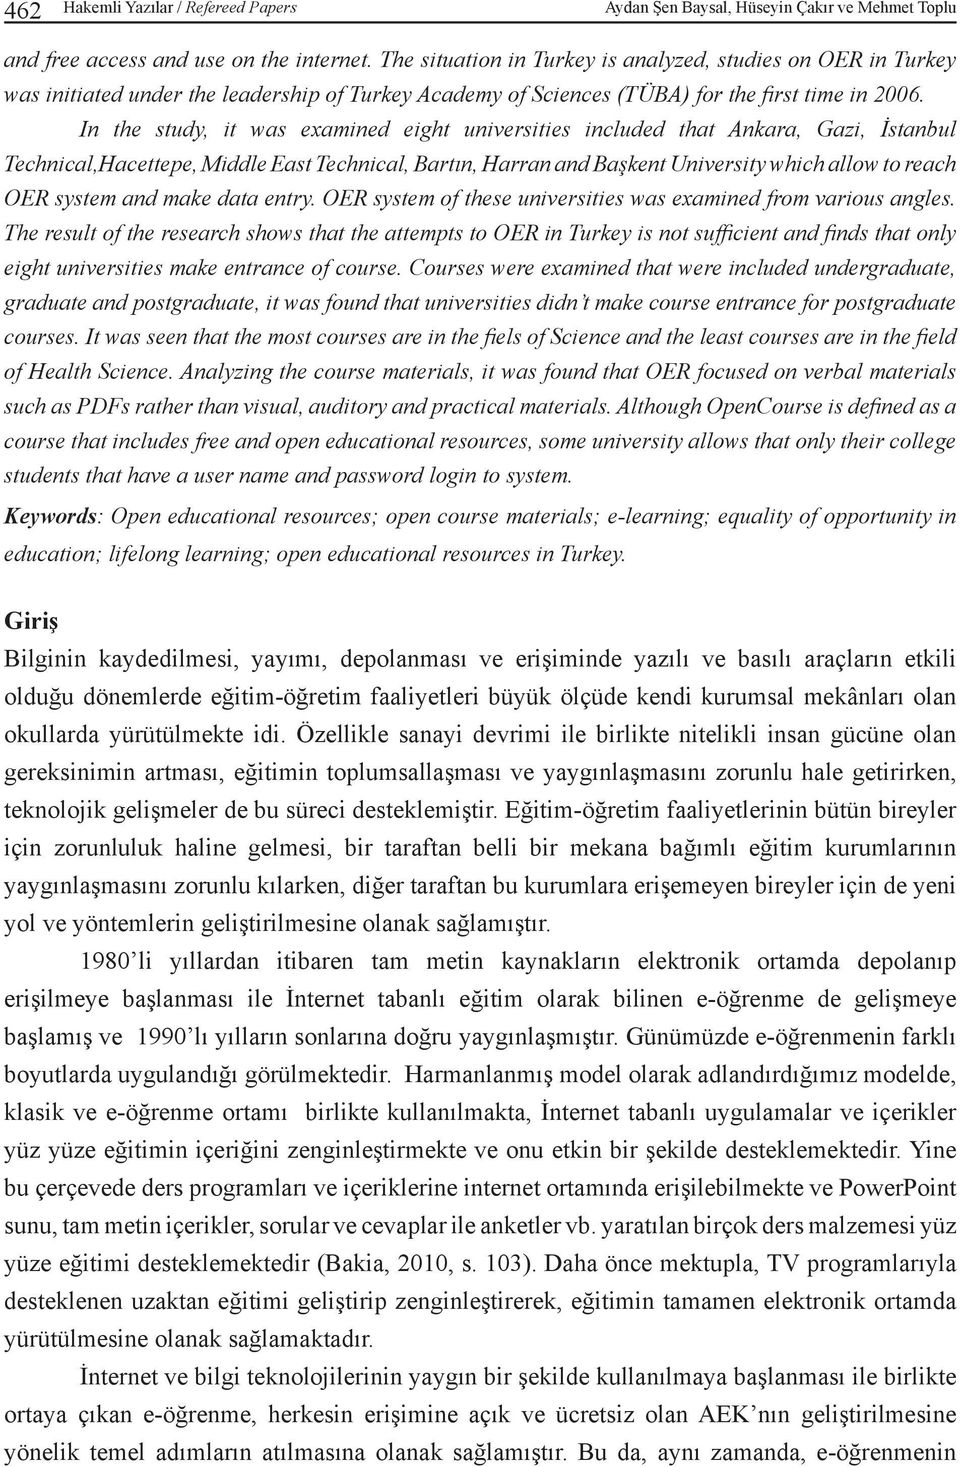 In the study, it was examined eight universities included that Ankara, Gazi, İstanbul Technical,Hacettepe, Middle East Technical, Bartın, Harran and Başkent University which allow to reach OER system